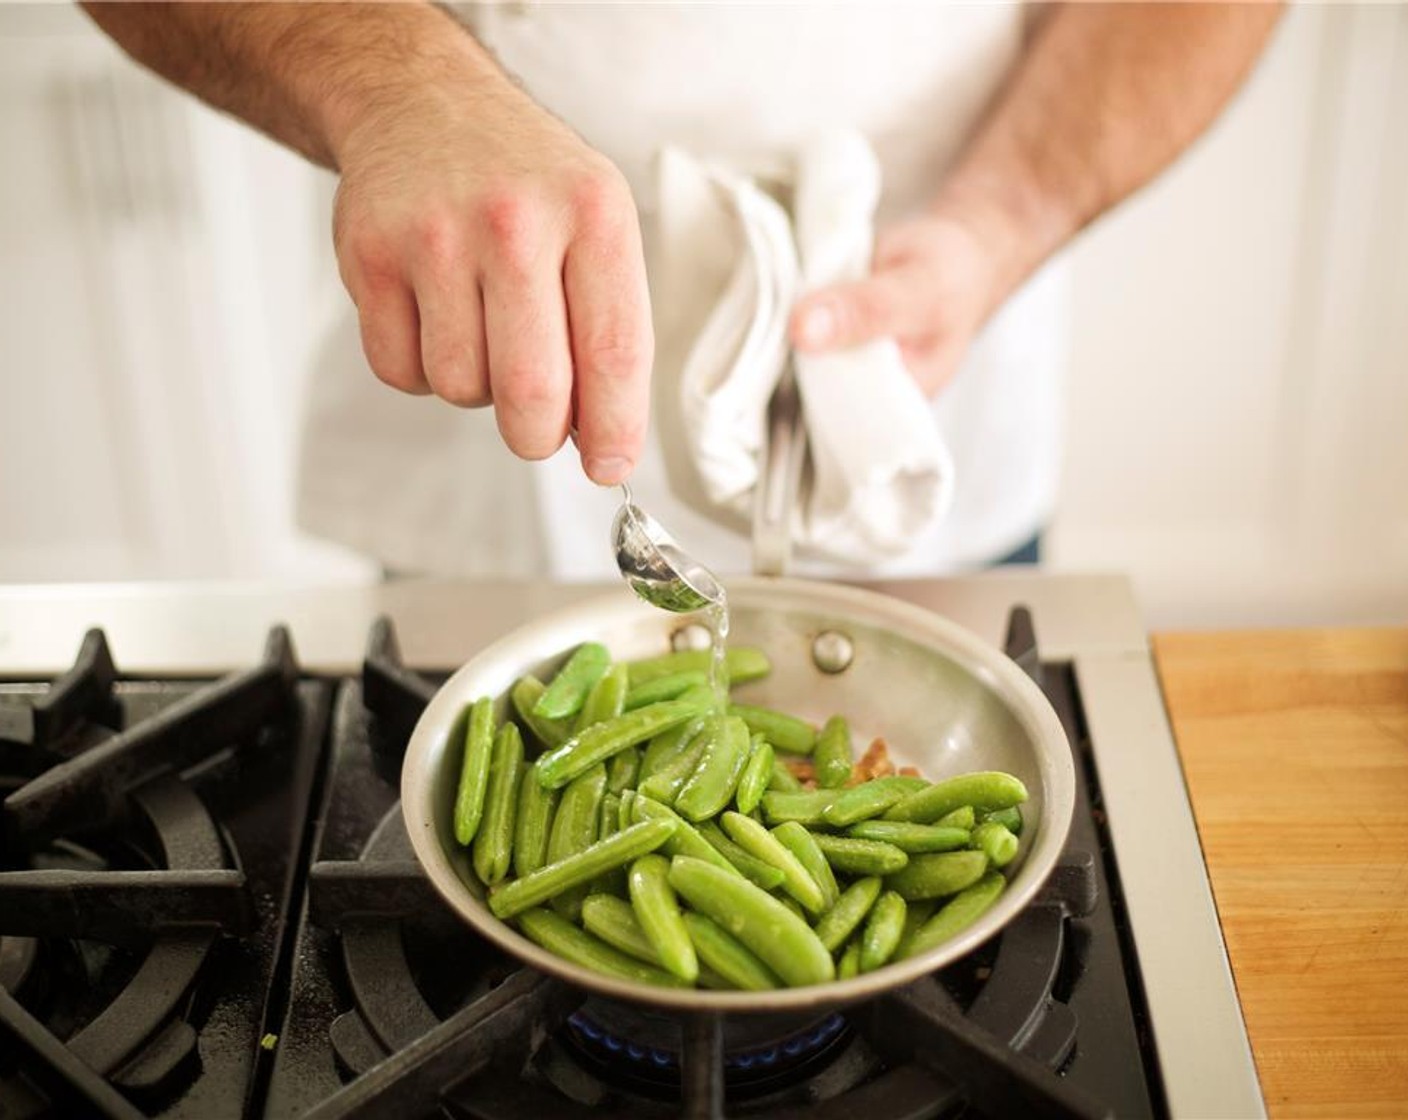 step 10 Add sliced garlic and saute for 30 seconds, being careful not to burn the garlic. Add sugar snap peas, 1/4 teaspoon salt and pinch of pepper; stir and cook for 2 minutes. Add 1 tablespoon water, cover and cook for 2 more minutes and remove from heat.